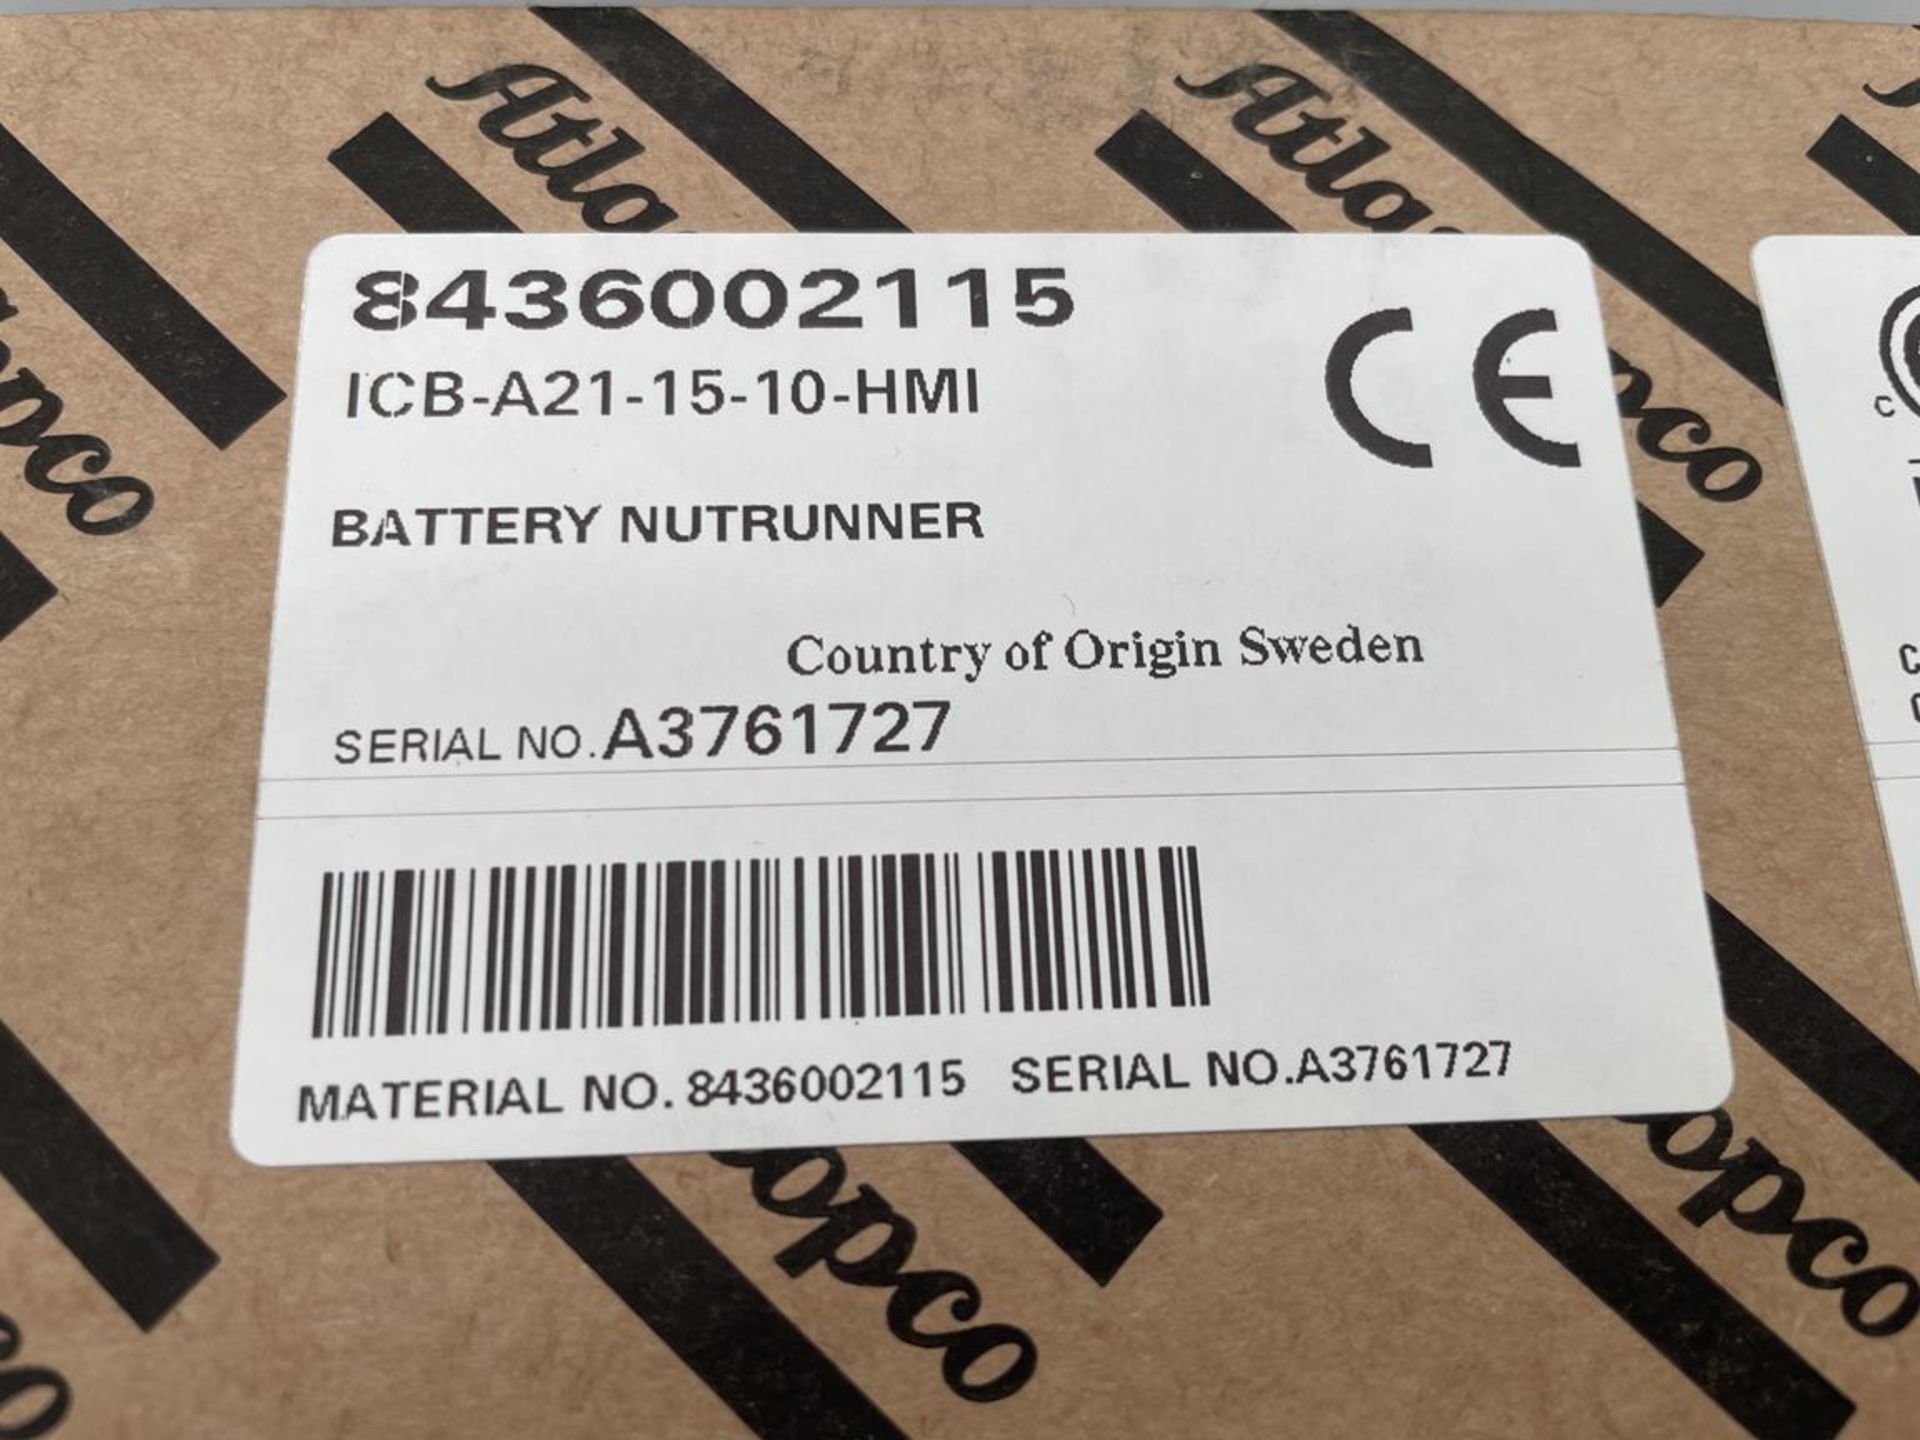 Atlas Copco, ICB-A21-15-10-HMI battery nut runner (boxed and unused) - Image 2 of 2